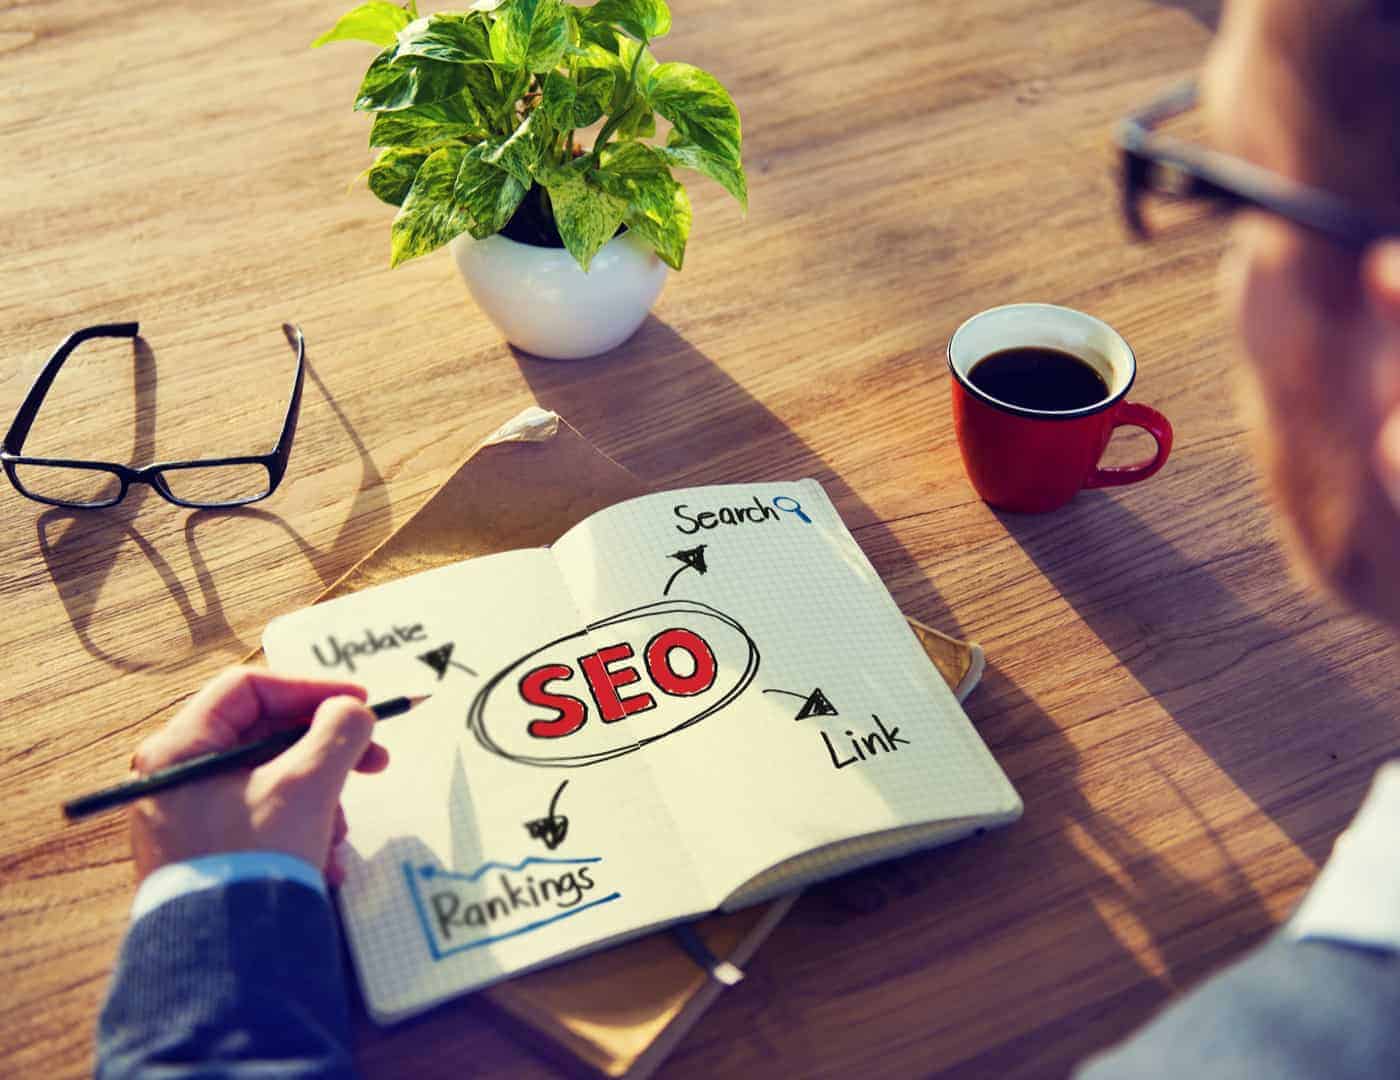 How Do I SEO My Blog so they will Rank Higher in Google?